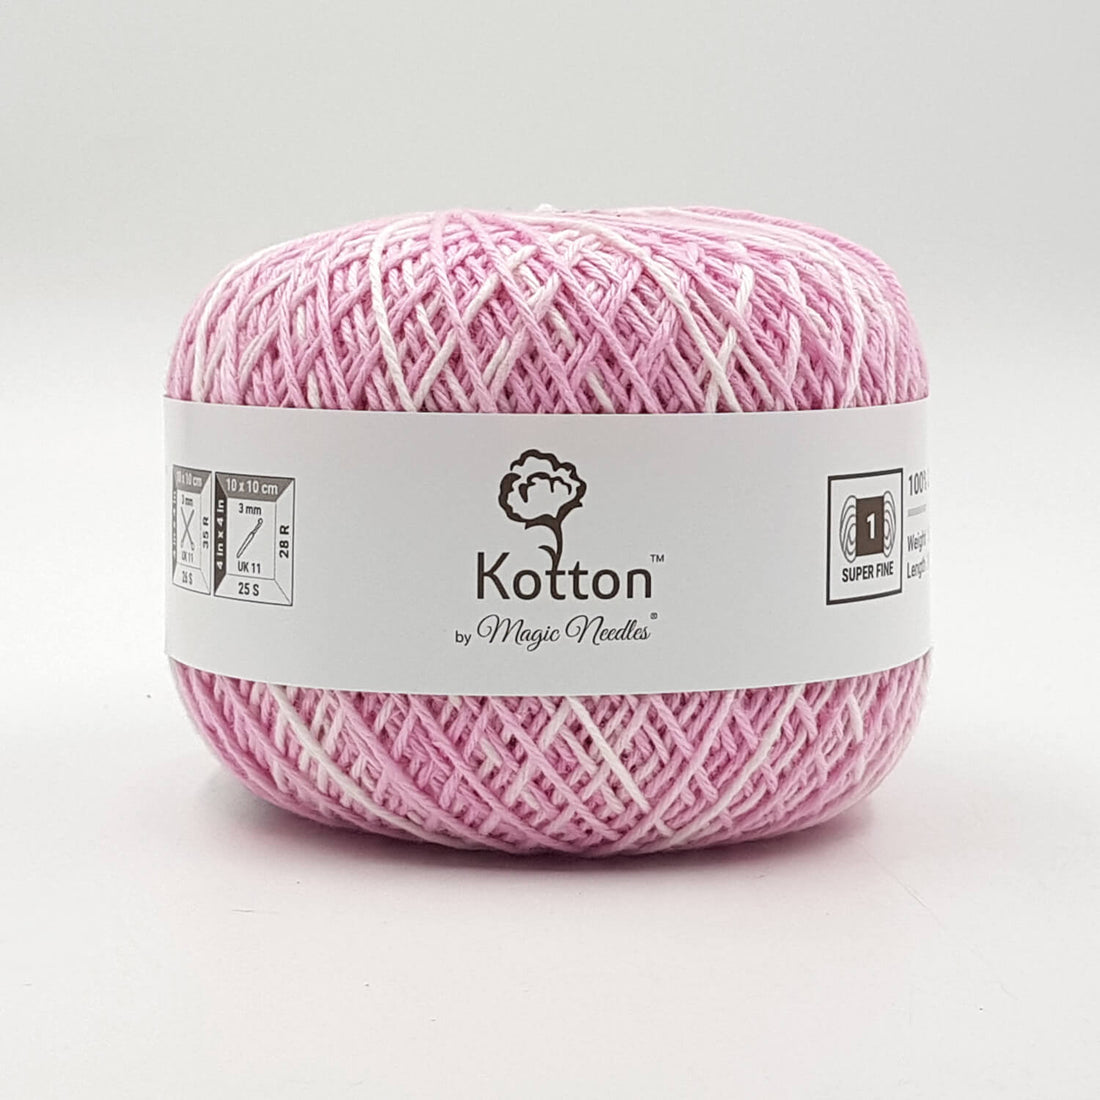 Discover Pure Comfort: Premium Cotton Yarns for Knitting and Crochet